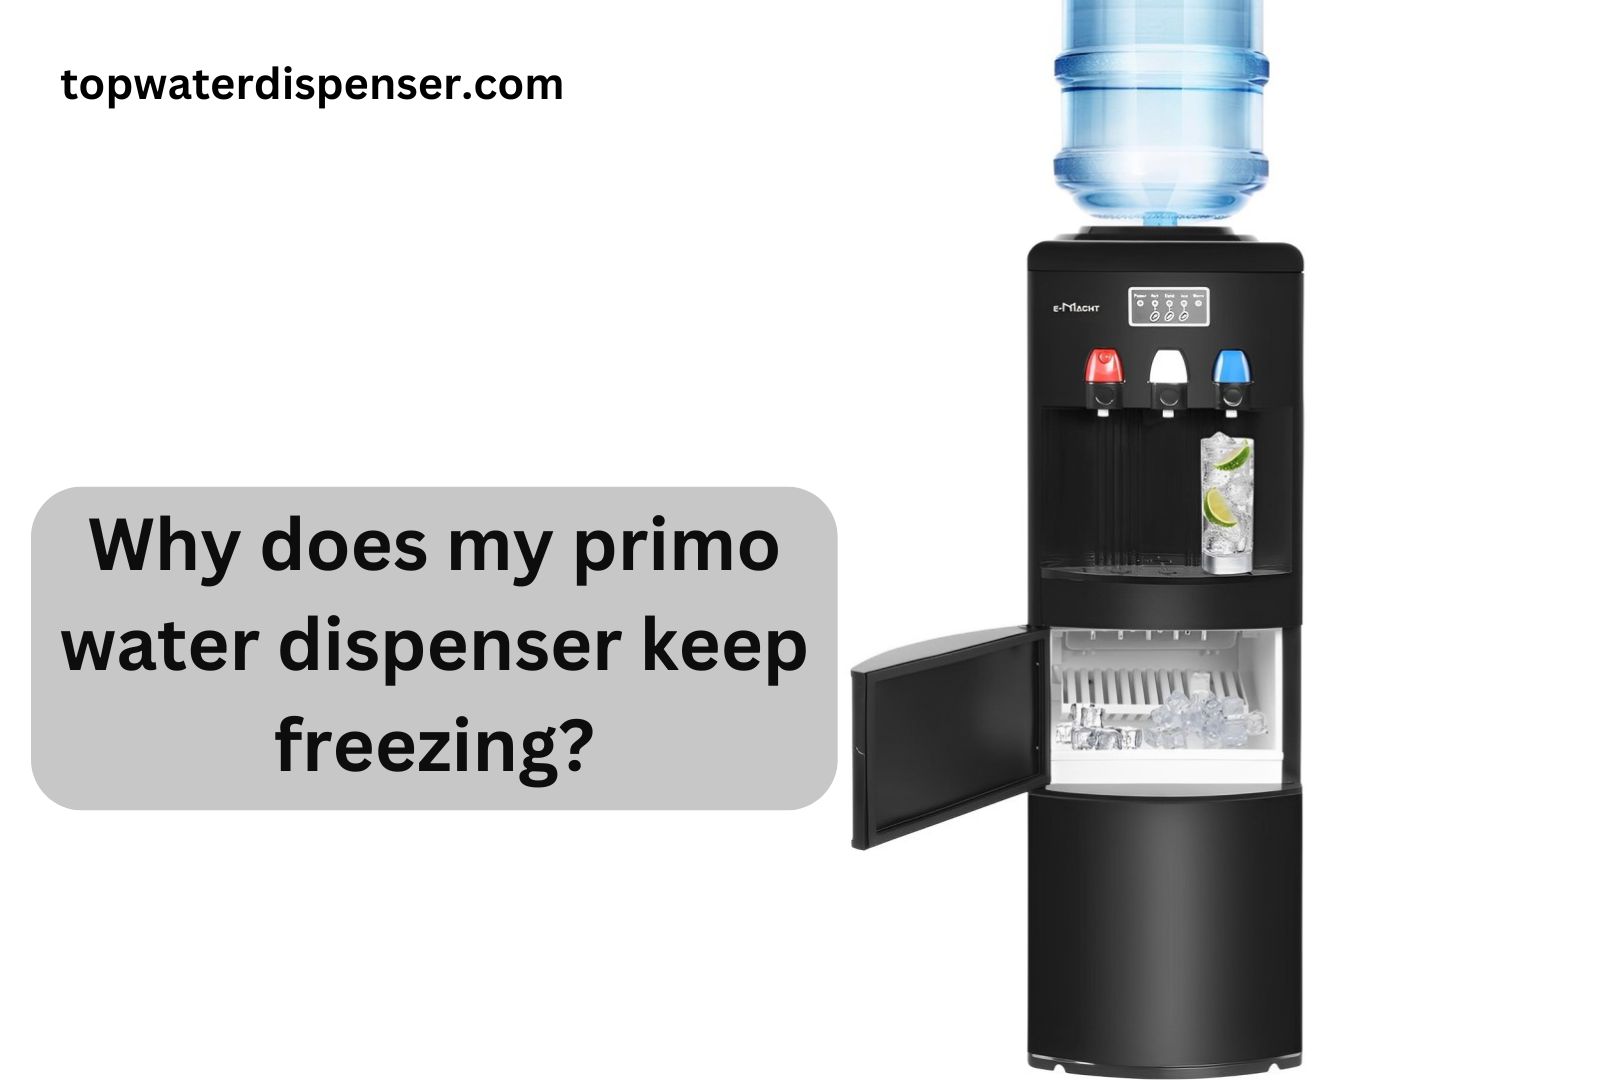 Why does my primo water dispenser keep freezing?